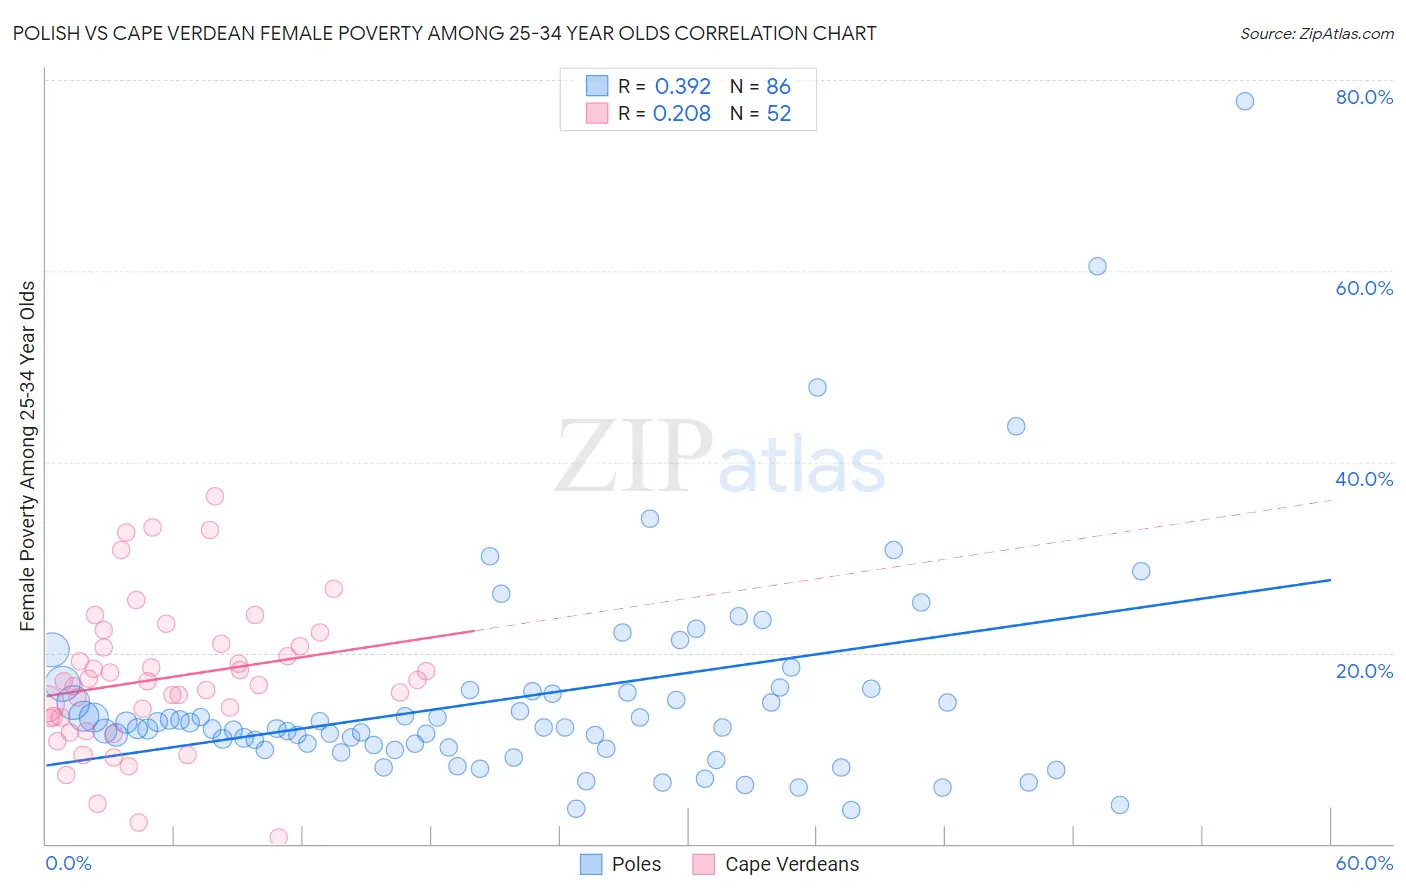 Polish vs Cape Verdean Female Poverty Among 25-34 Year Olds